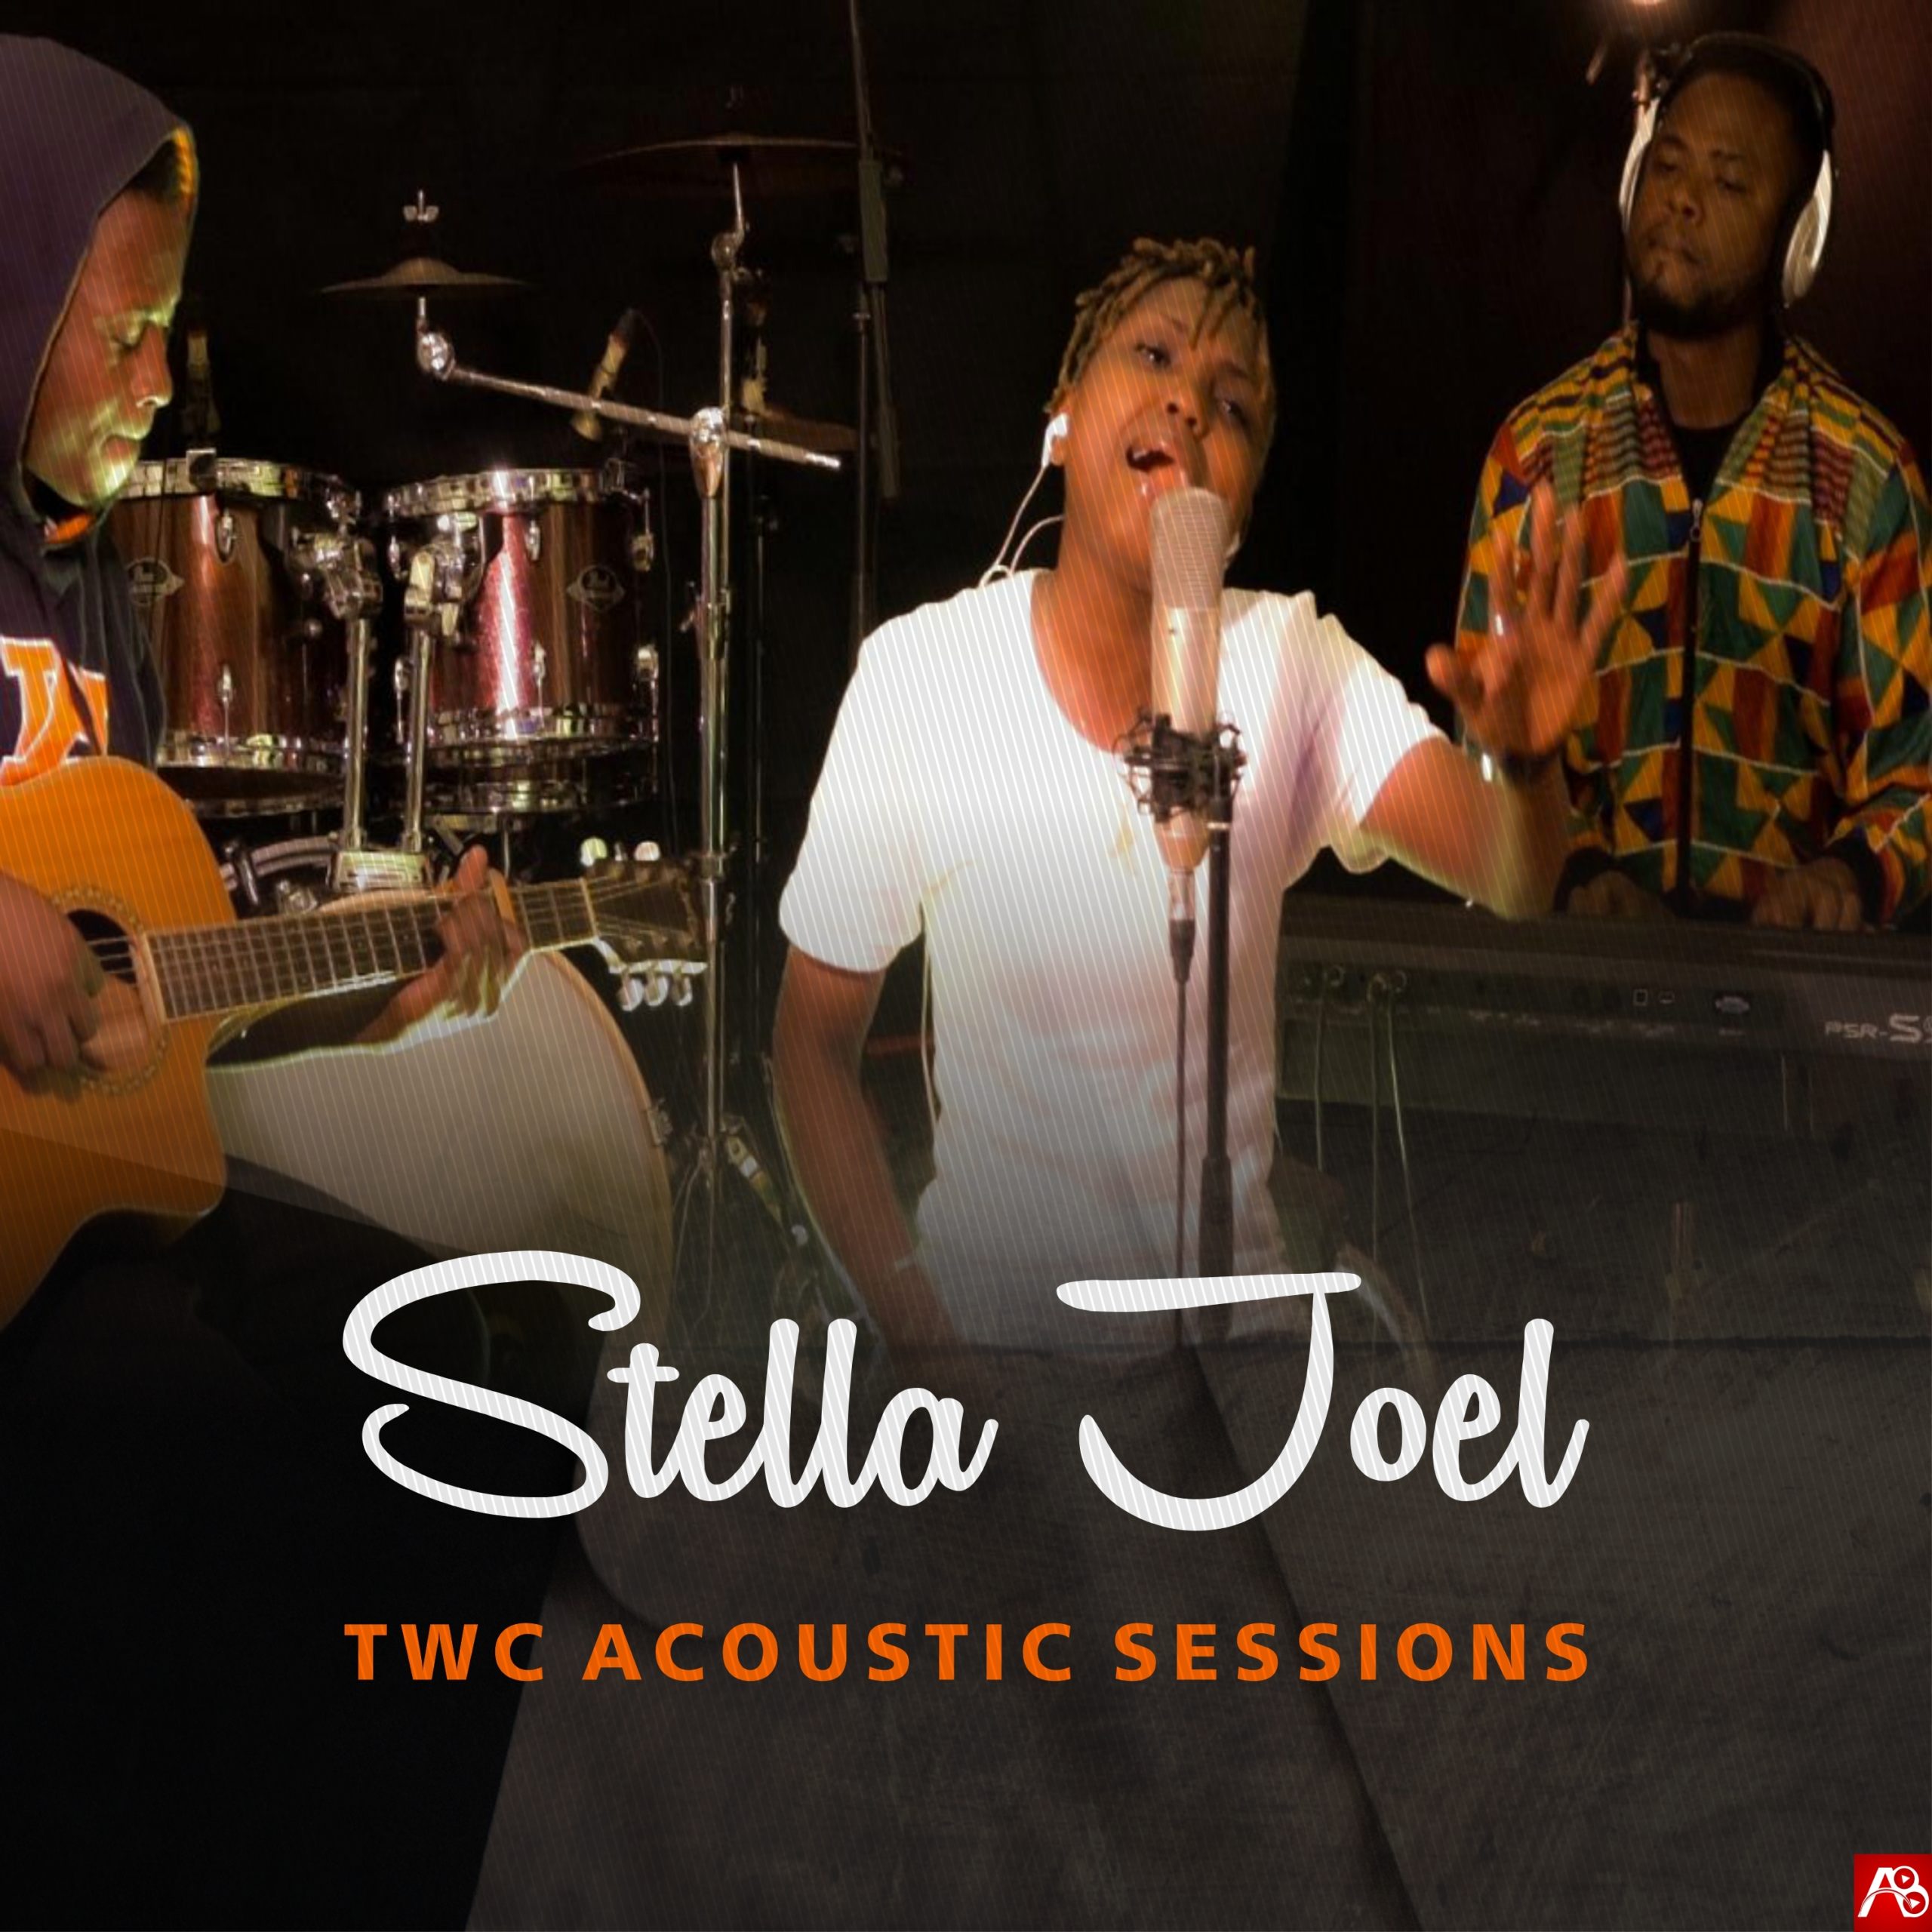 Stella Joel,Edition Of TWC Acoustic Sessions , Christian Song,Christian Songs, Download Naija Gospel songs ,  DOWNLOAD NIGERIAN GOSPEL MUSIC,Ghana Gospel Music, Free Gospel Music Download,Gospel Music Download,Ghanaian Gospel Mp3,Ghanaian Music,Get More Music @AllBaze.com,Gospel MP3, Gospel Music, Gospel Naija ,GOSPEL SONGS, LATEST NAIJA GOSPEL MUSIC, Latest Nigeria Gospel Songs, Latest Nigeria Gospel Song, Naija Loaded Gospel,Nigeria Gospel Music,  Nigeria Gospel Song, Nigeria gospel songs, Nigerian Gospel Artists,Nigerian Gospel Singers, NIGERIAN GOSPEL MUSIC,Ghanaian Gospel Songs,Ghanaian Mp3, 